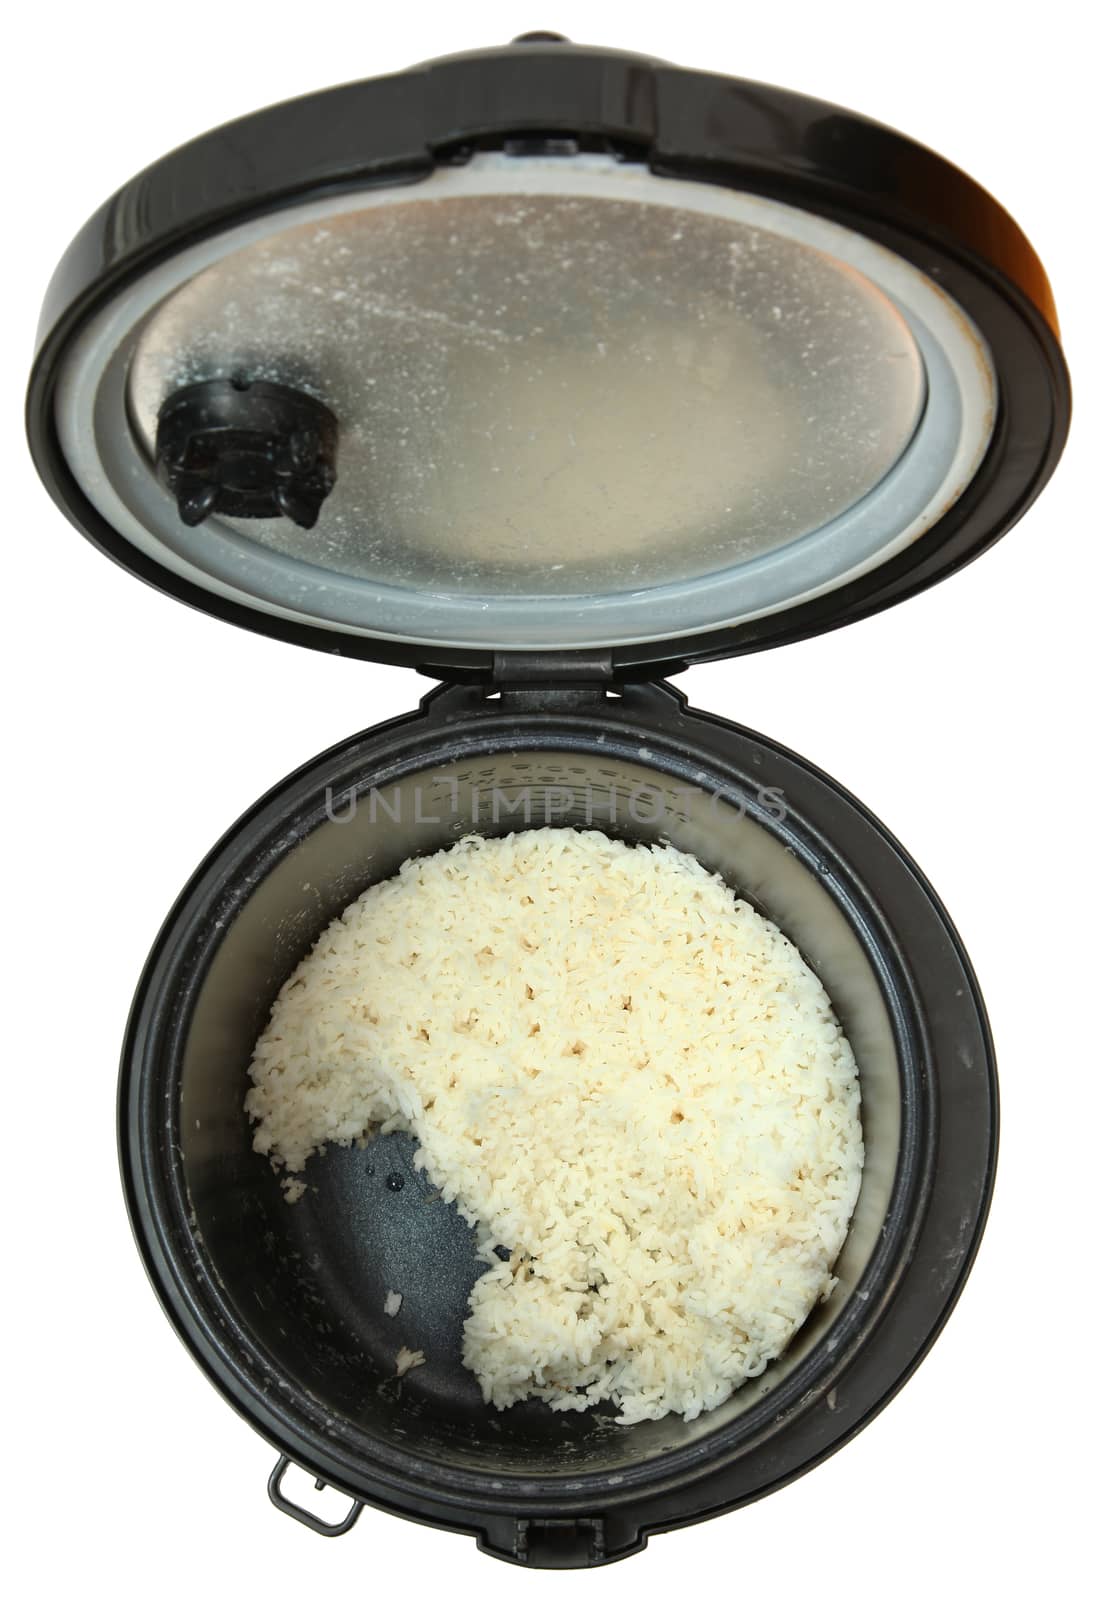 Top View Used Rice Cooker with White Rice, Over White